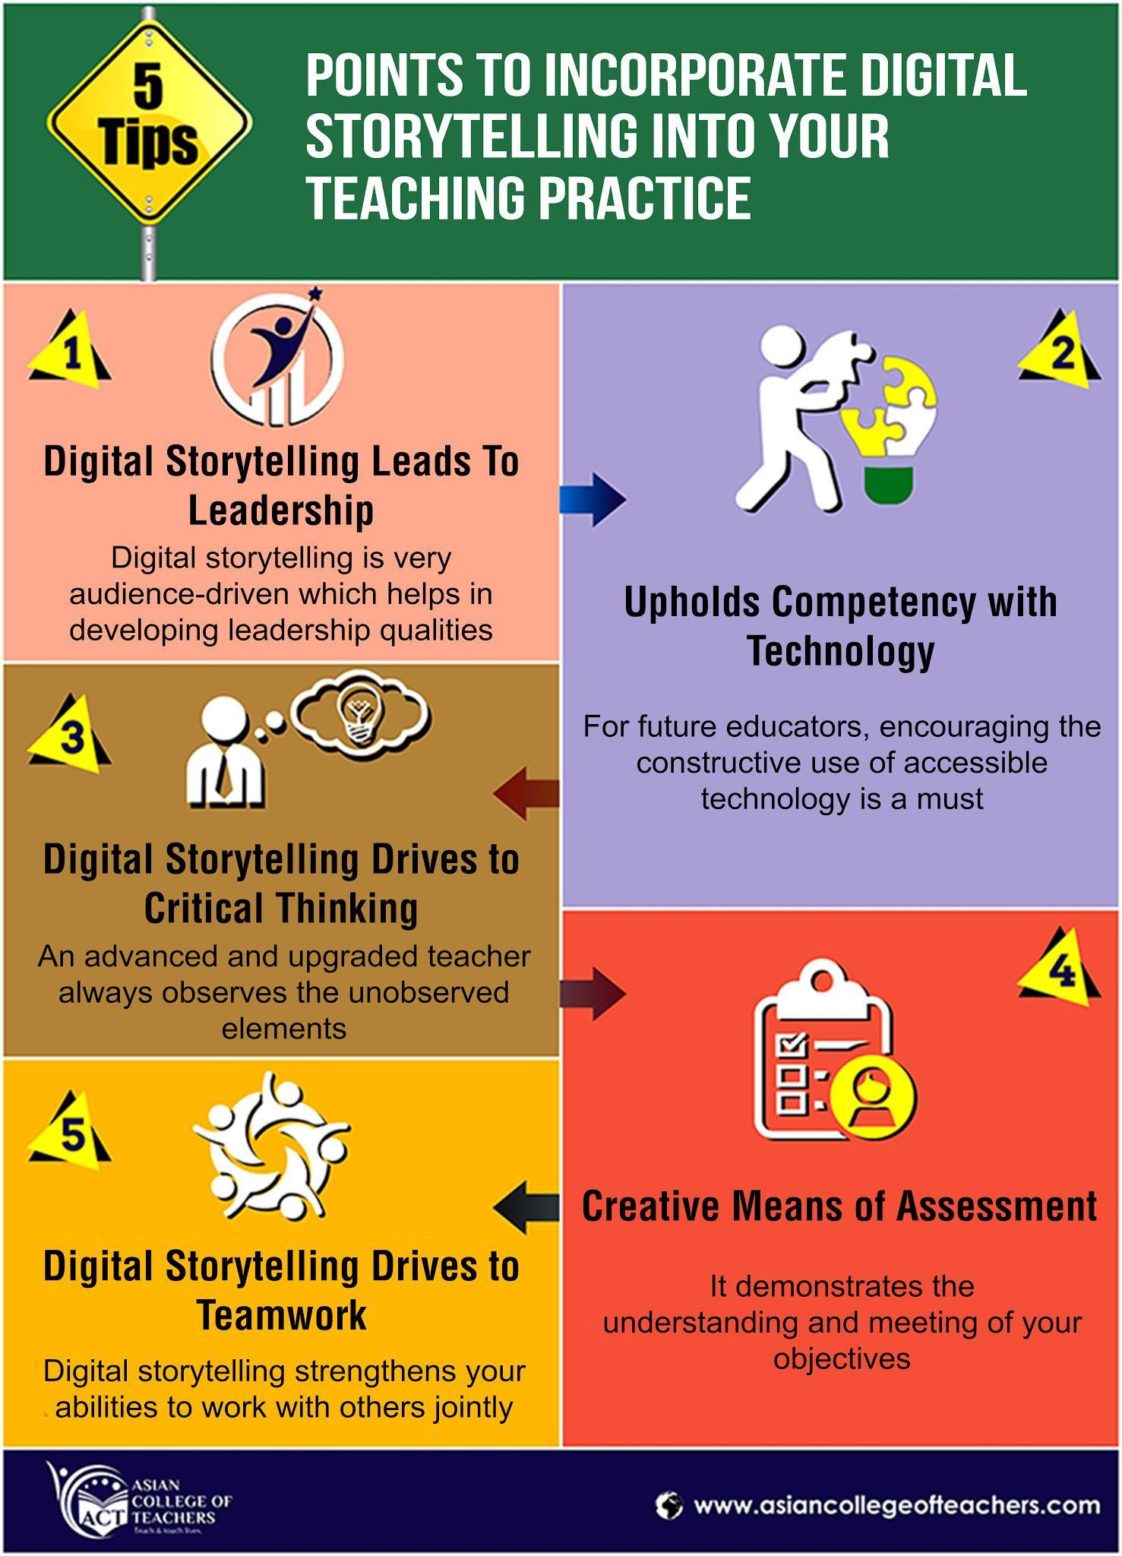 a systematic review of educational digital storytelling